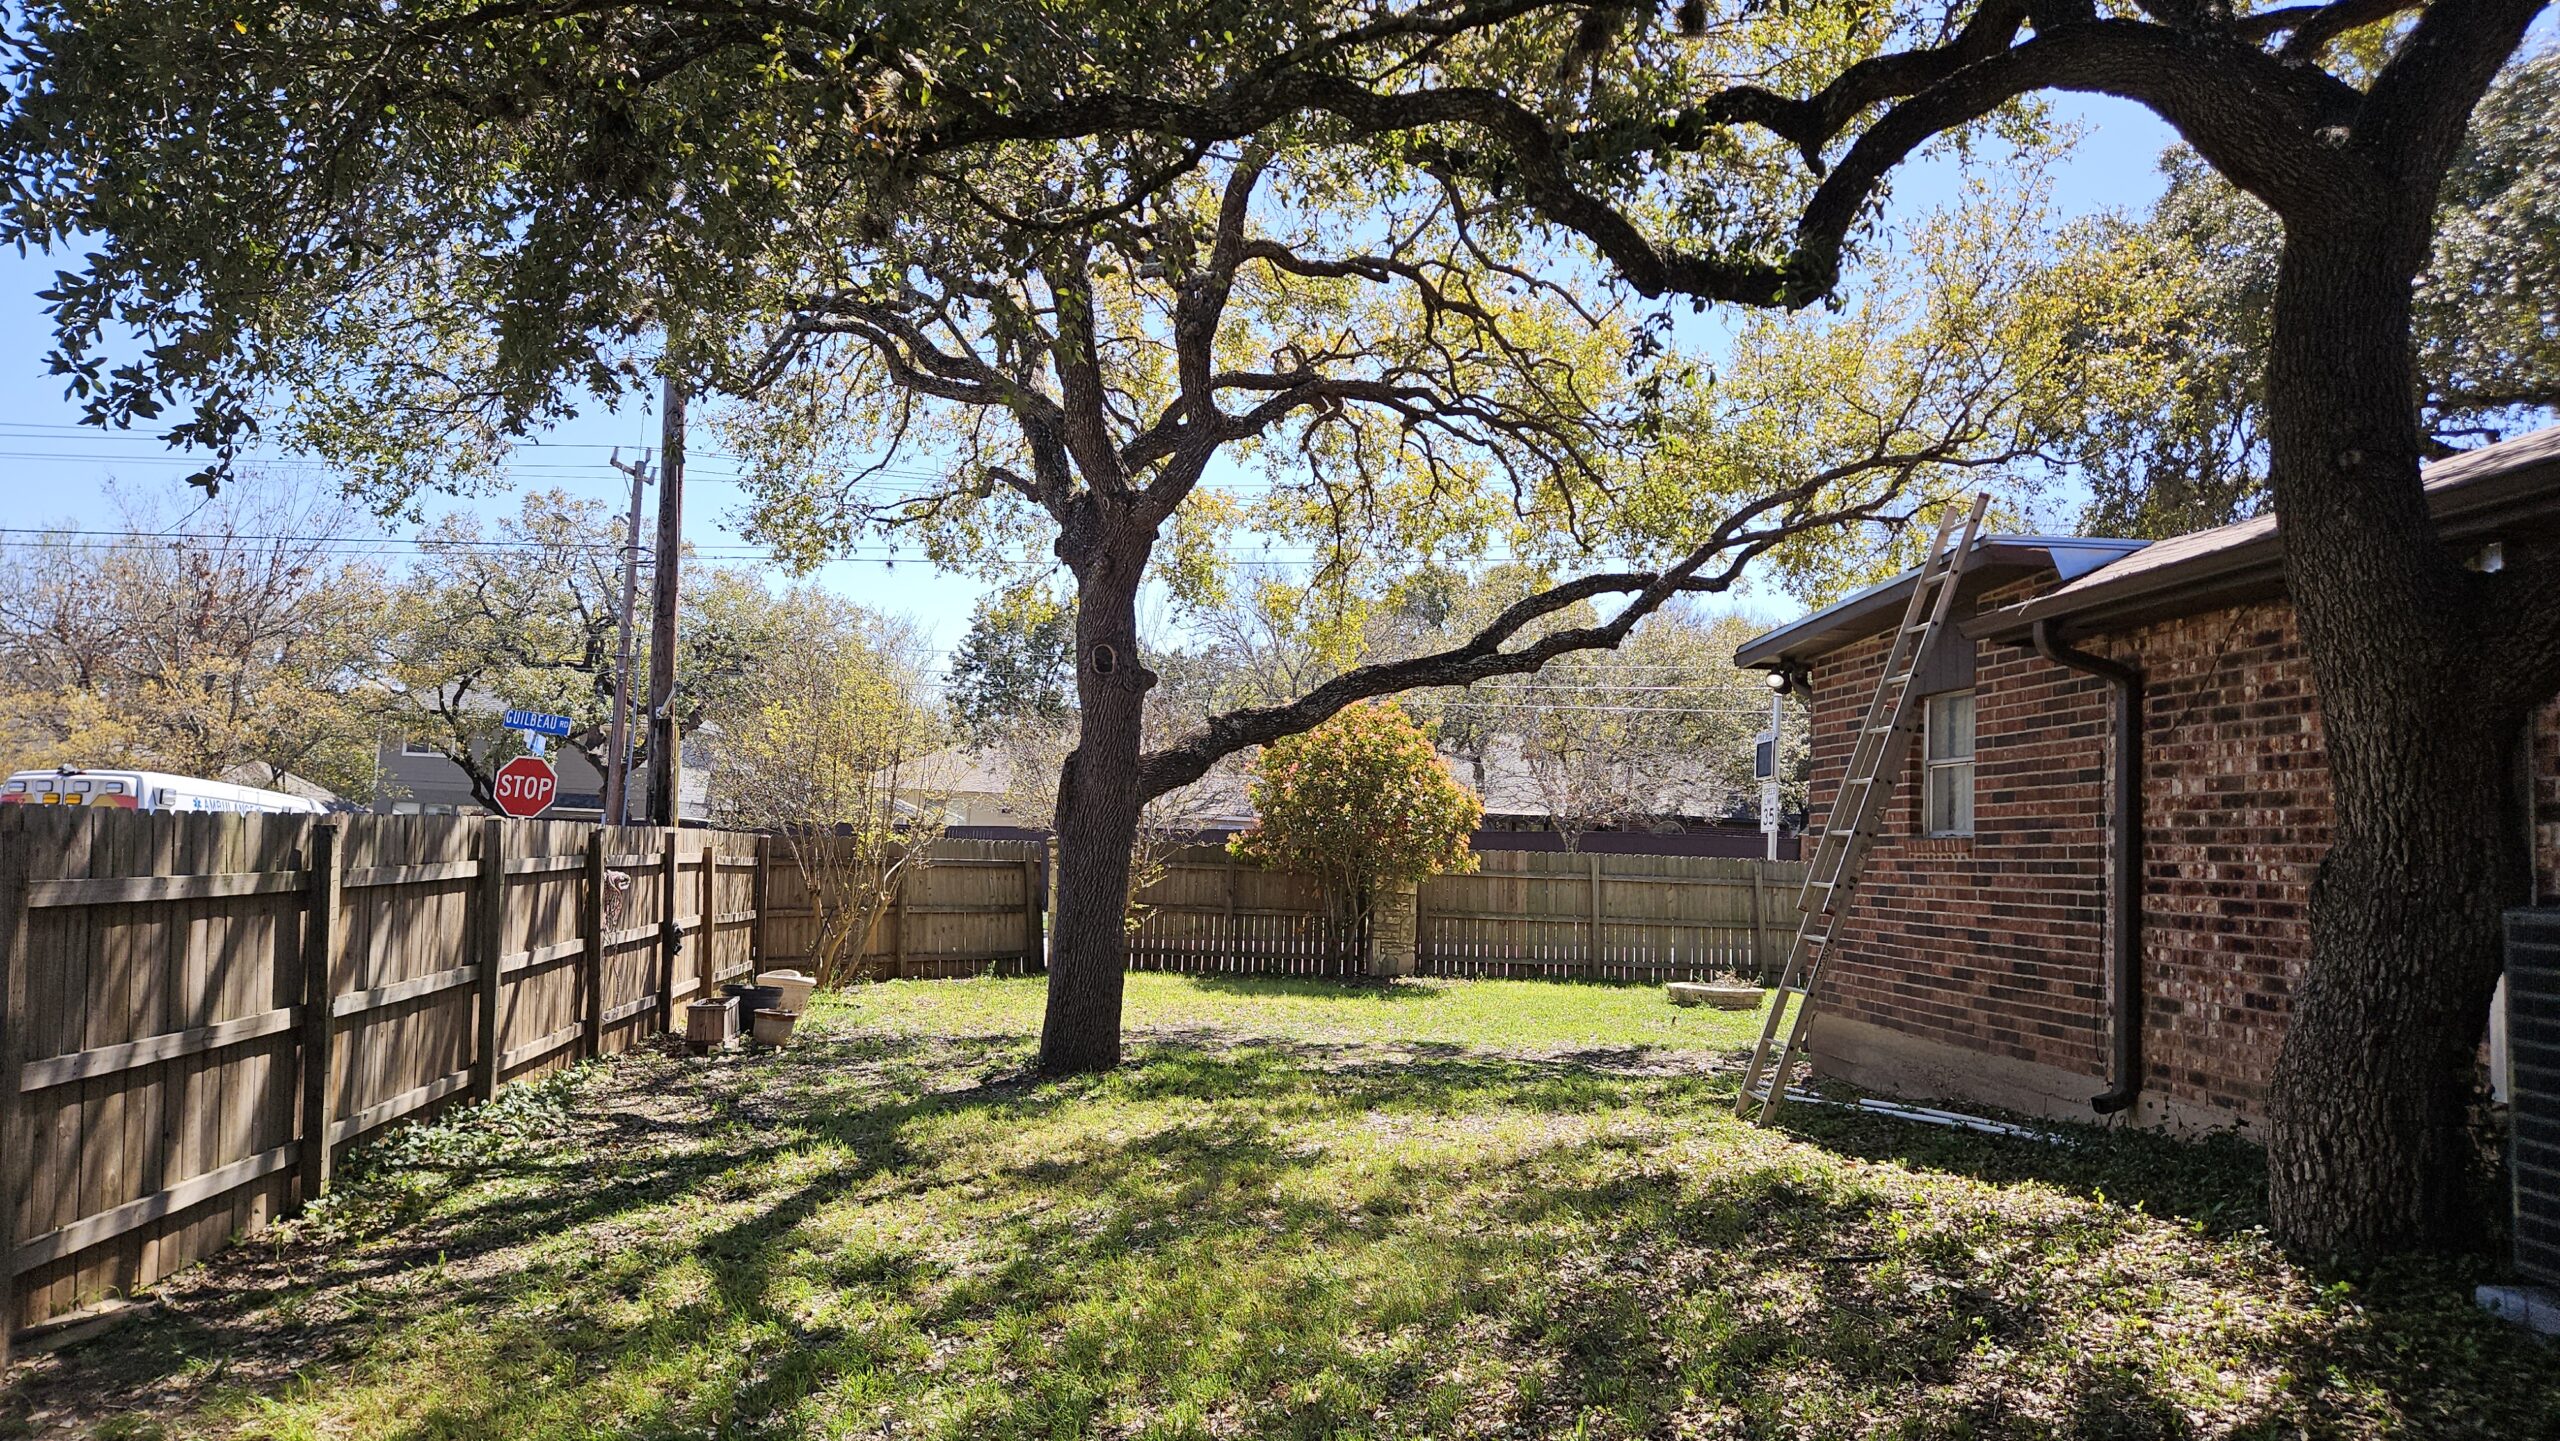 Sunlight filters to the grass of a suburban backyard after two Live Oaks received a substantial "hair cut." With the canopy lifted, there is at least 15 feet clearance with the neighborhood sidewalk. A tree trimming ladder leans against a red brick single story home.